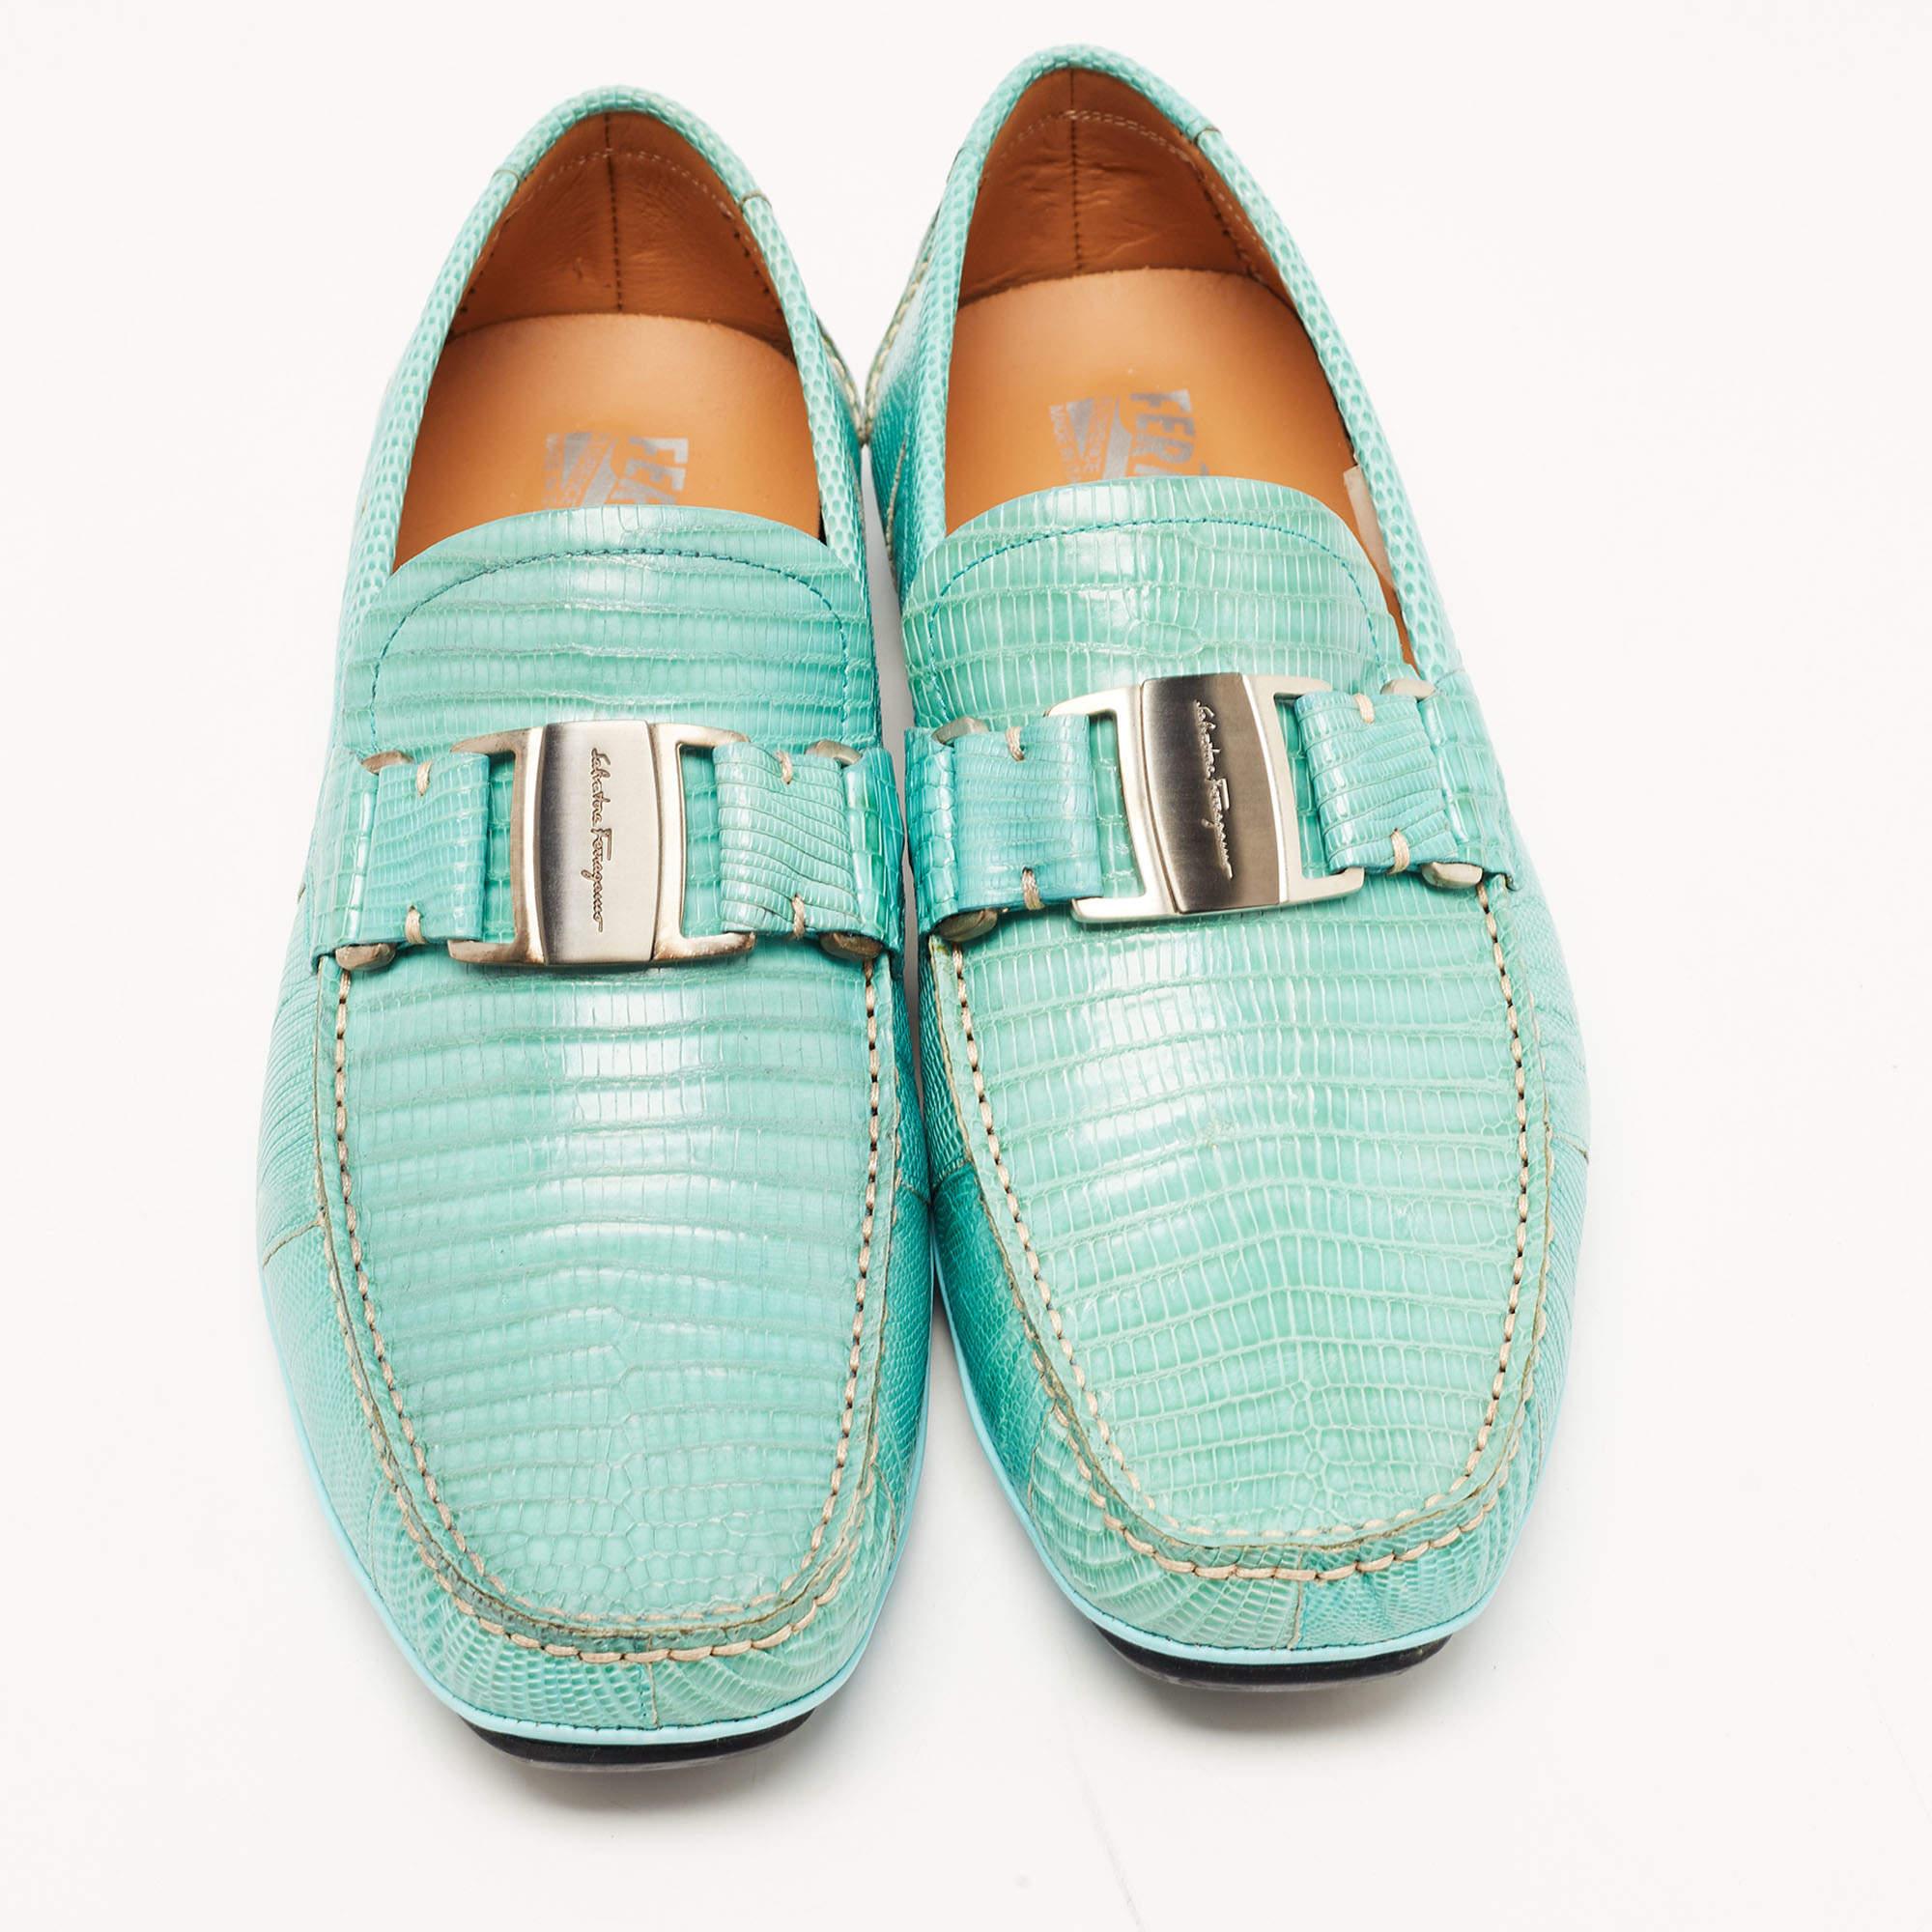 Created using exotic lizard leather, these Sardegna loafers from Salvatore Ferragamo lend a unique aspect to your footwear collection. The loafers have a light blue shade on their exterior, with silver-toned accents decorating the vamps. Embrace a